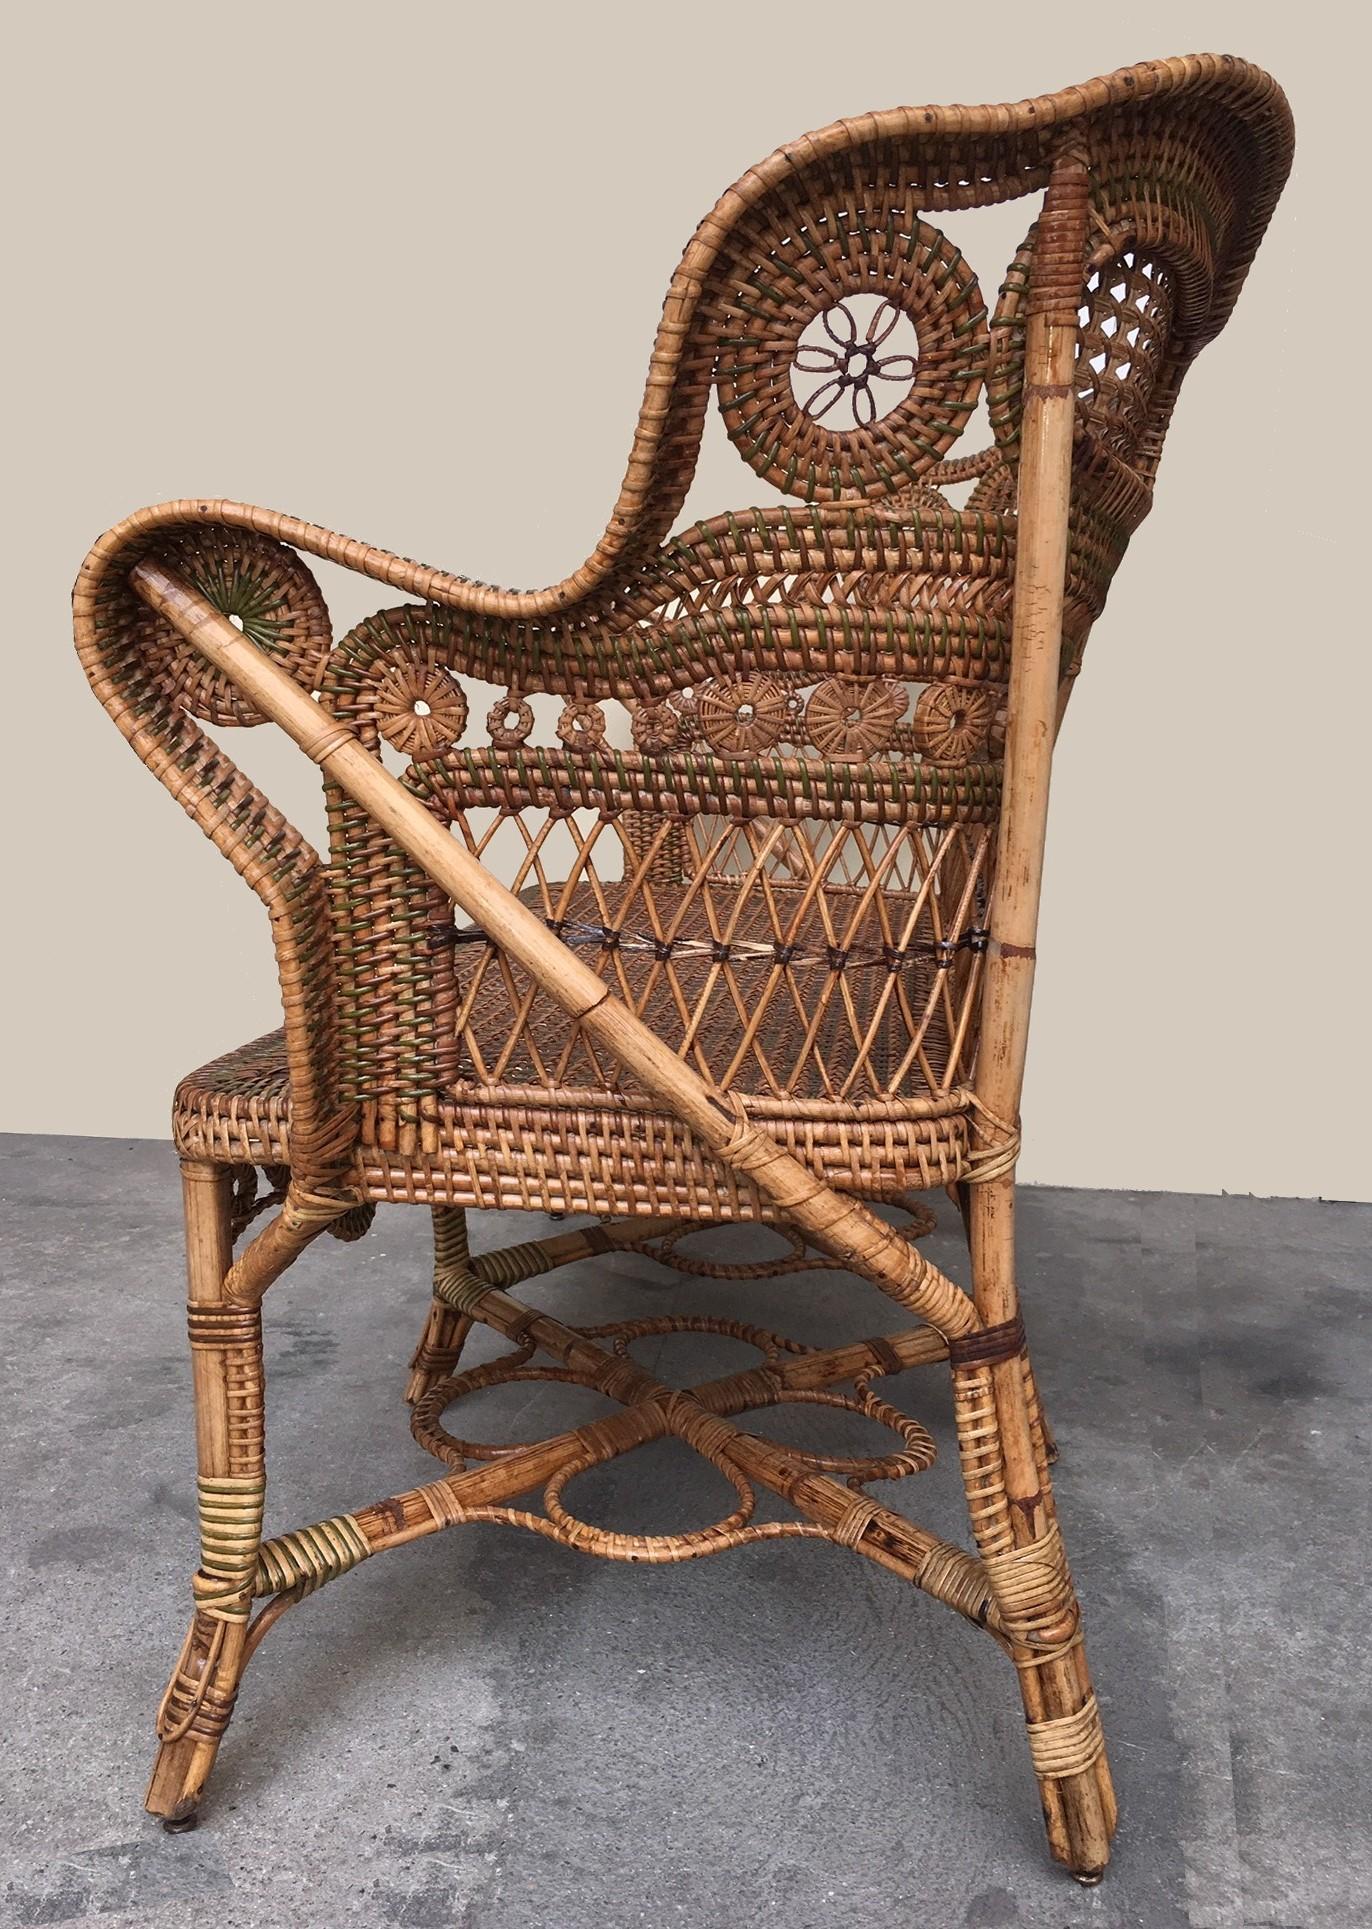 Rattan Garden Furniture Set by Maison Perret Vibert, Second Half of 19th Century For Sale 4